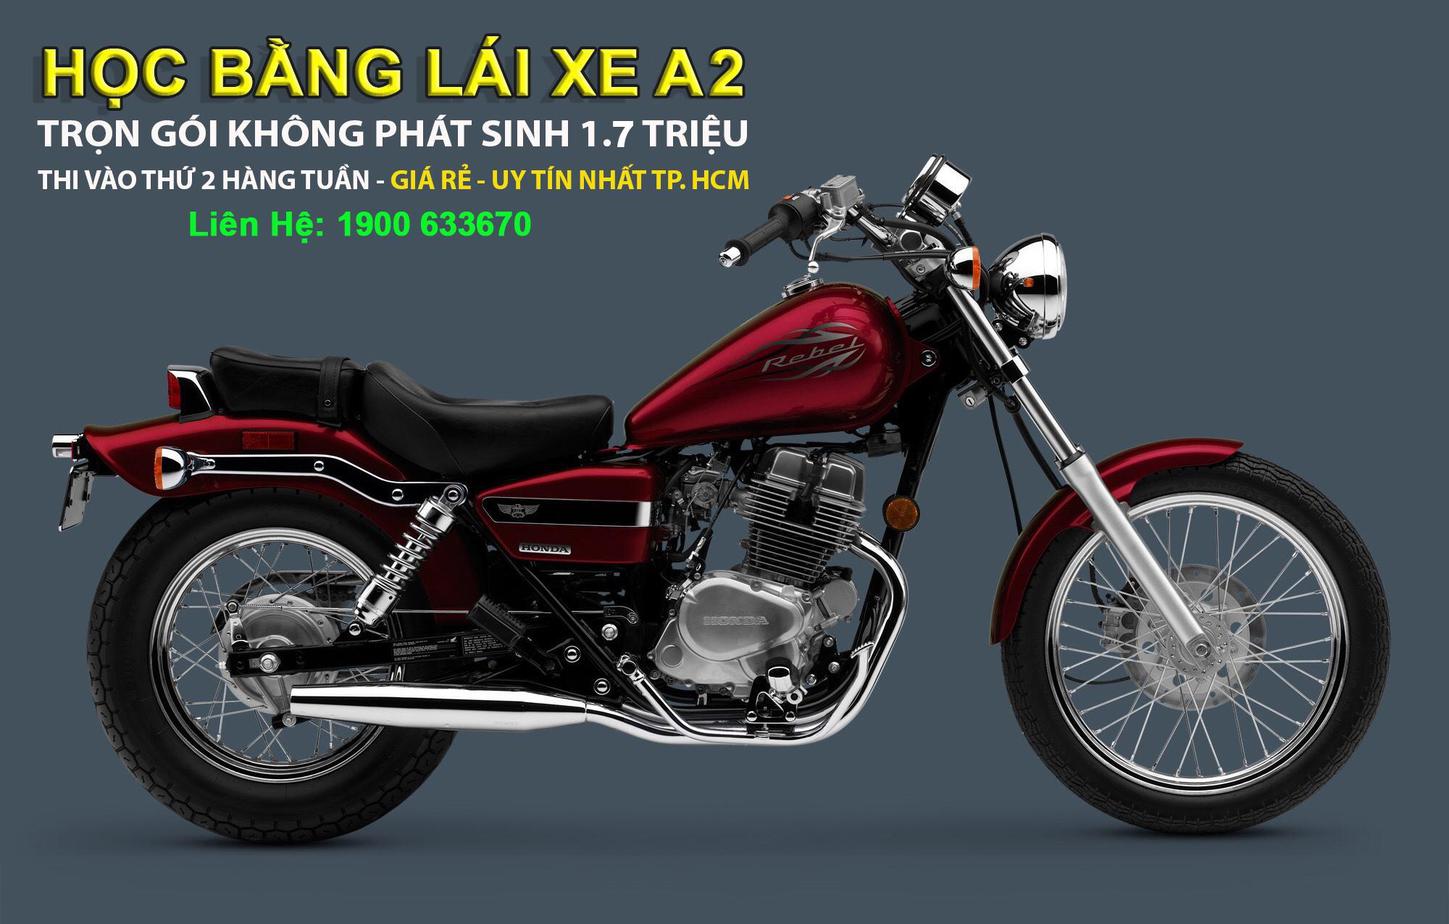 Training: Study & Test for Class A2 Motorcycle License (large displacement motorcycle>175cc) 14